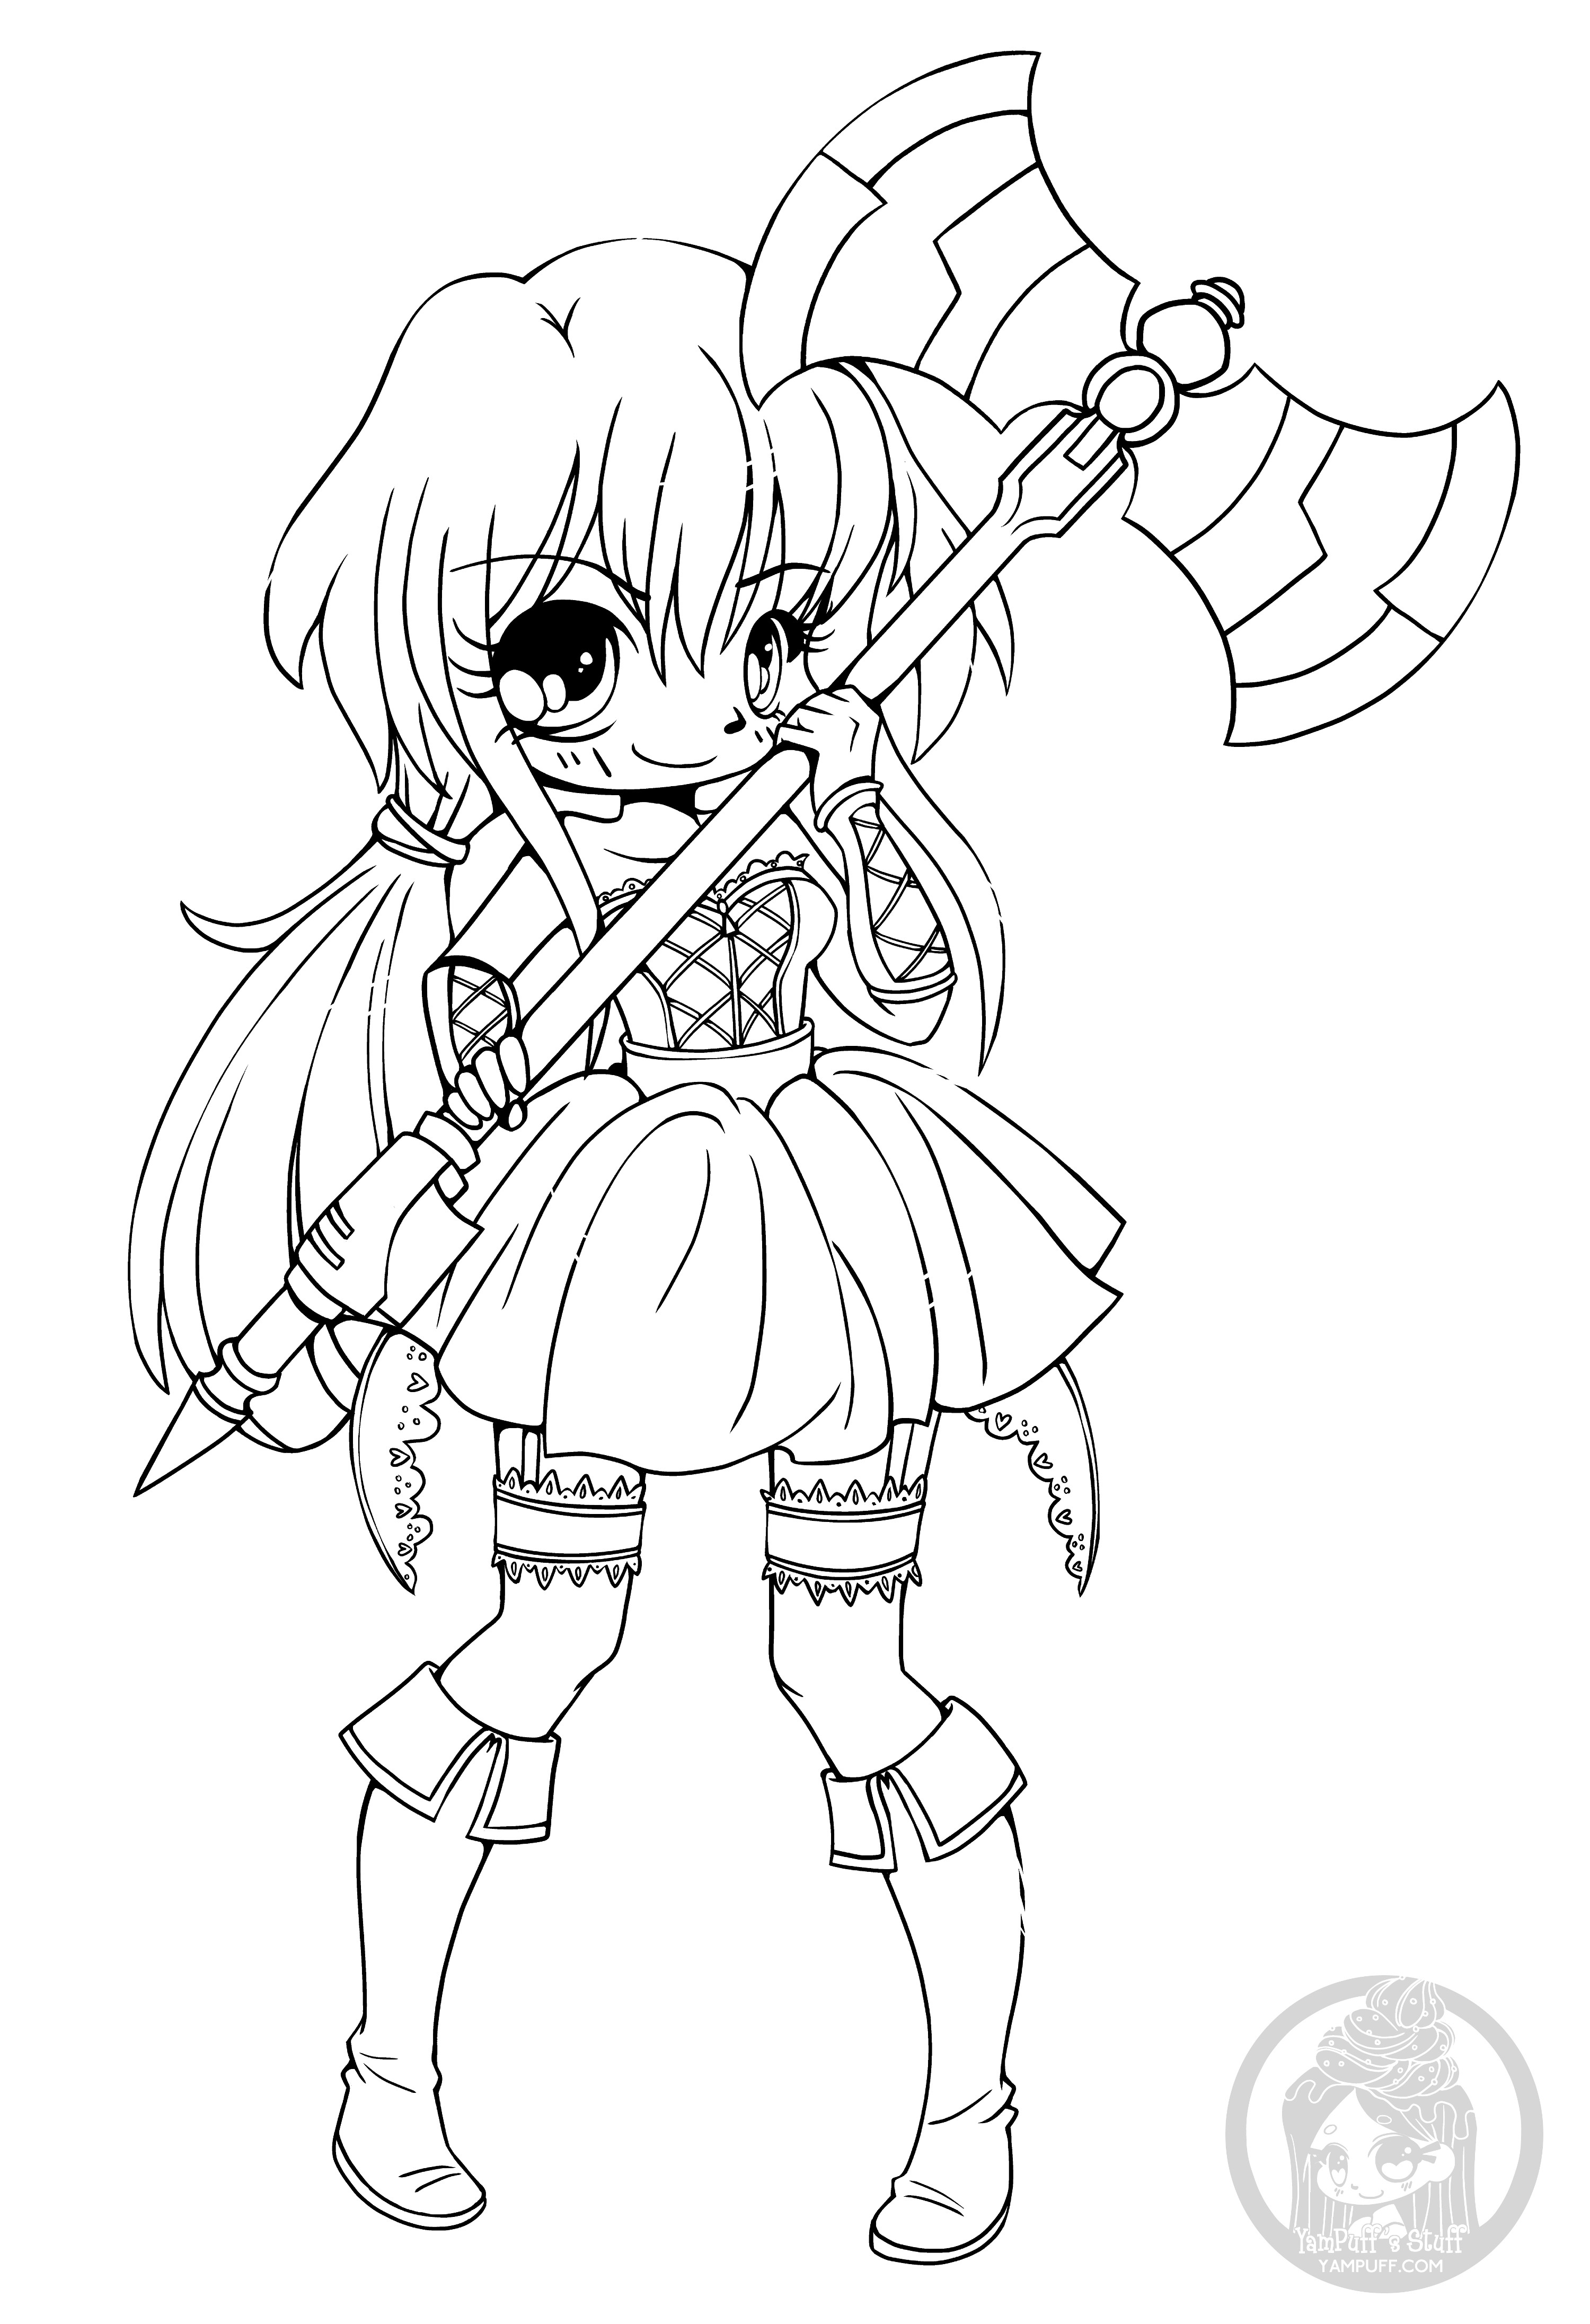 Chibi Coloring Pages Girl
 Chibis Free Chibi Coloring Pages • YamPuff s Stuff